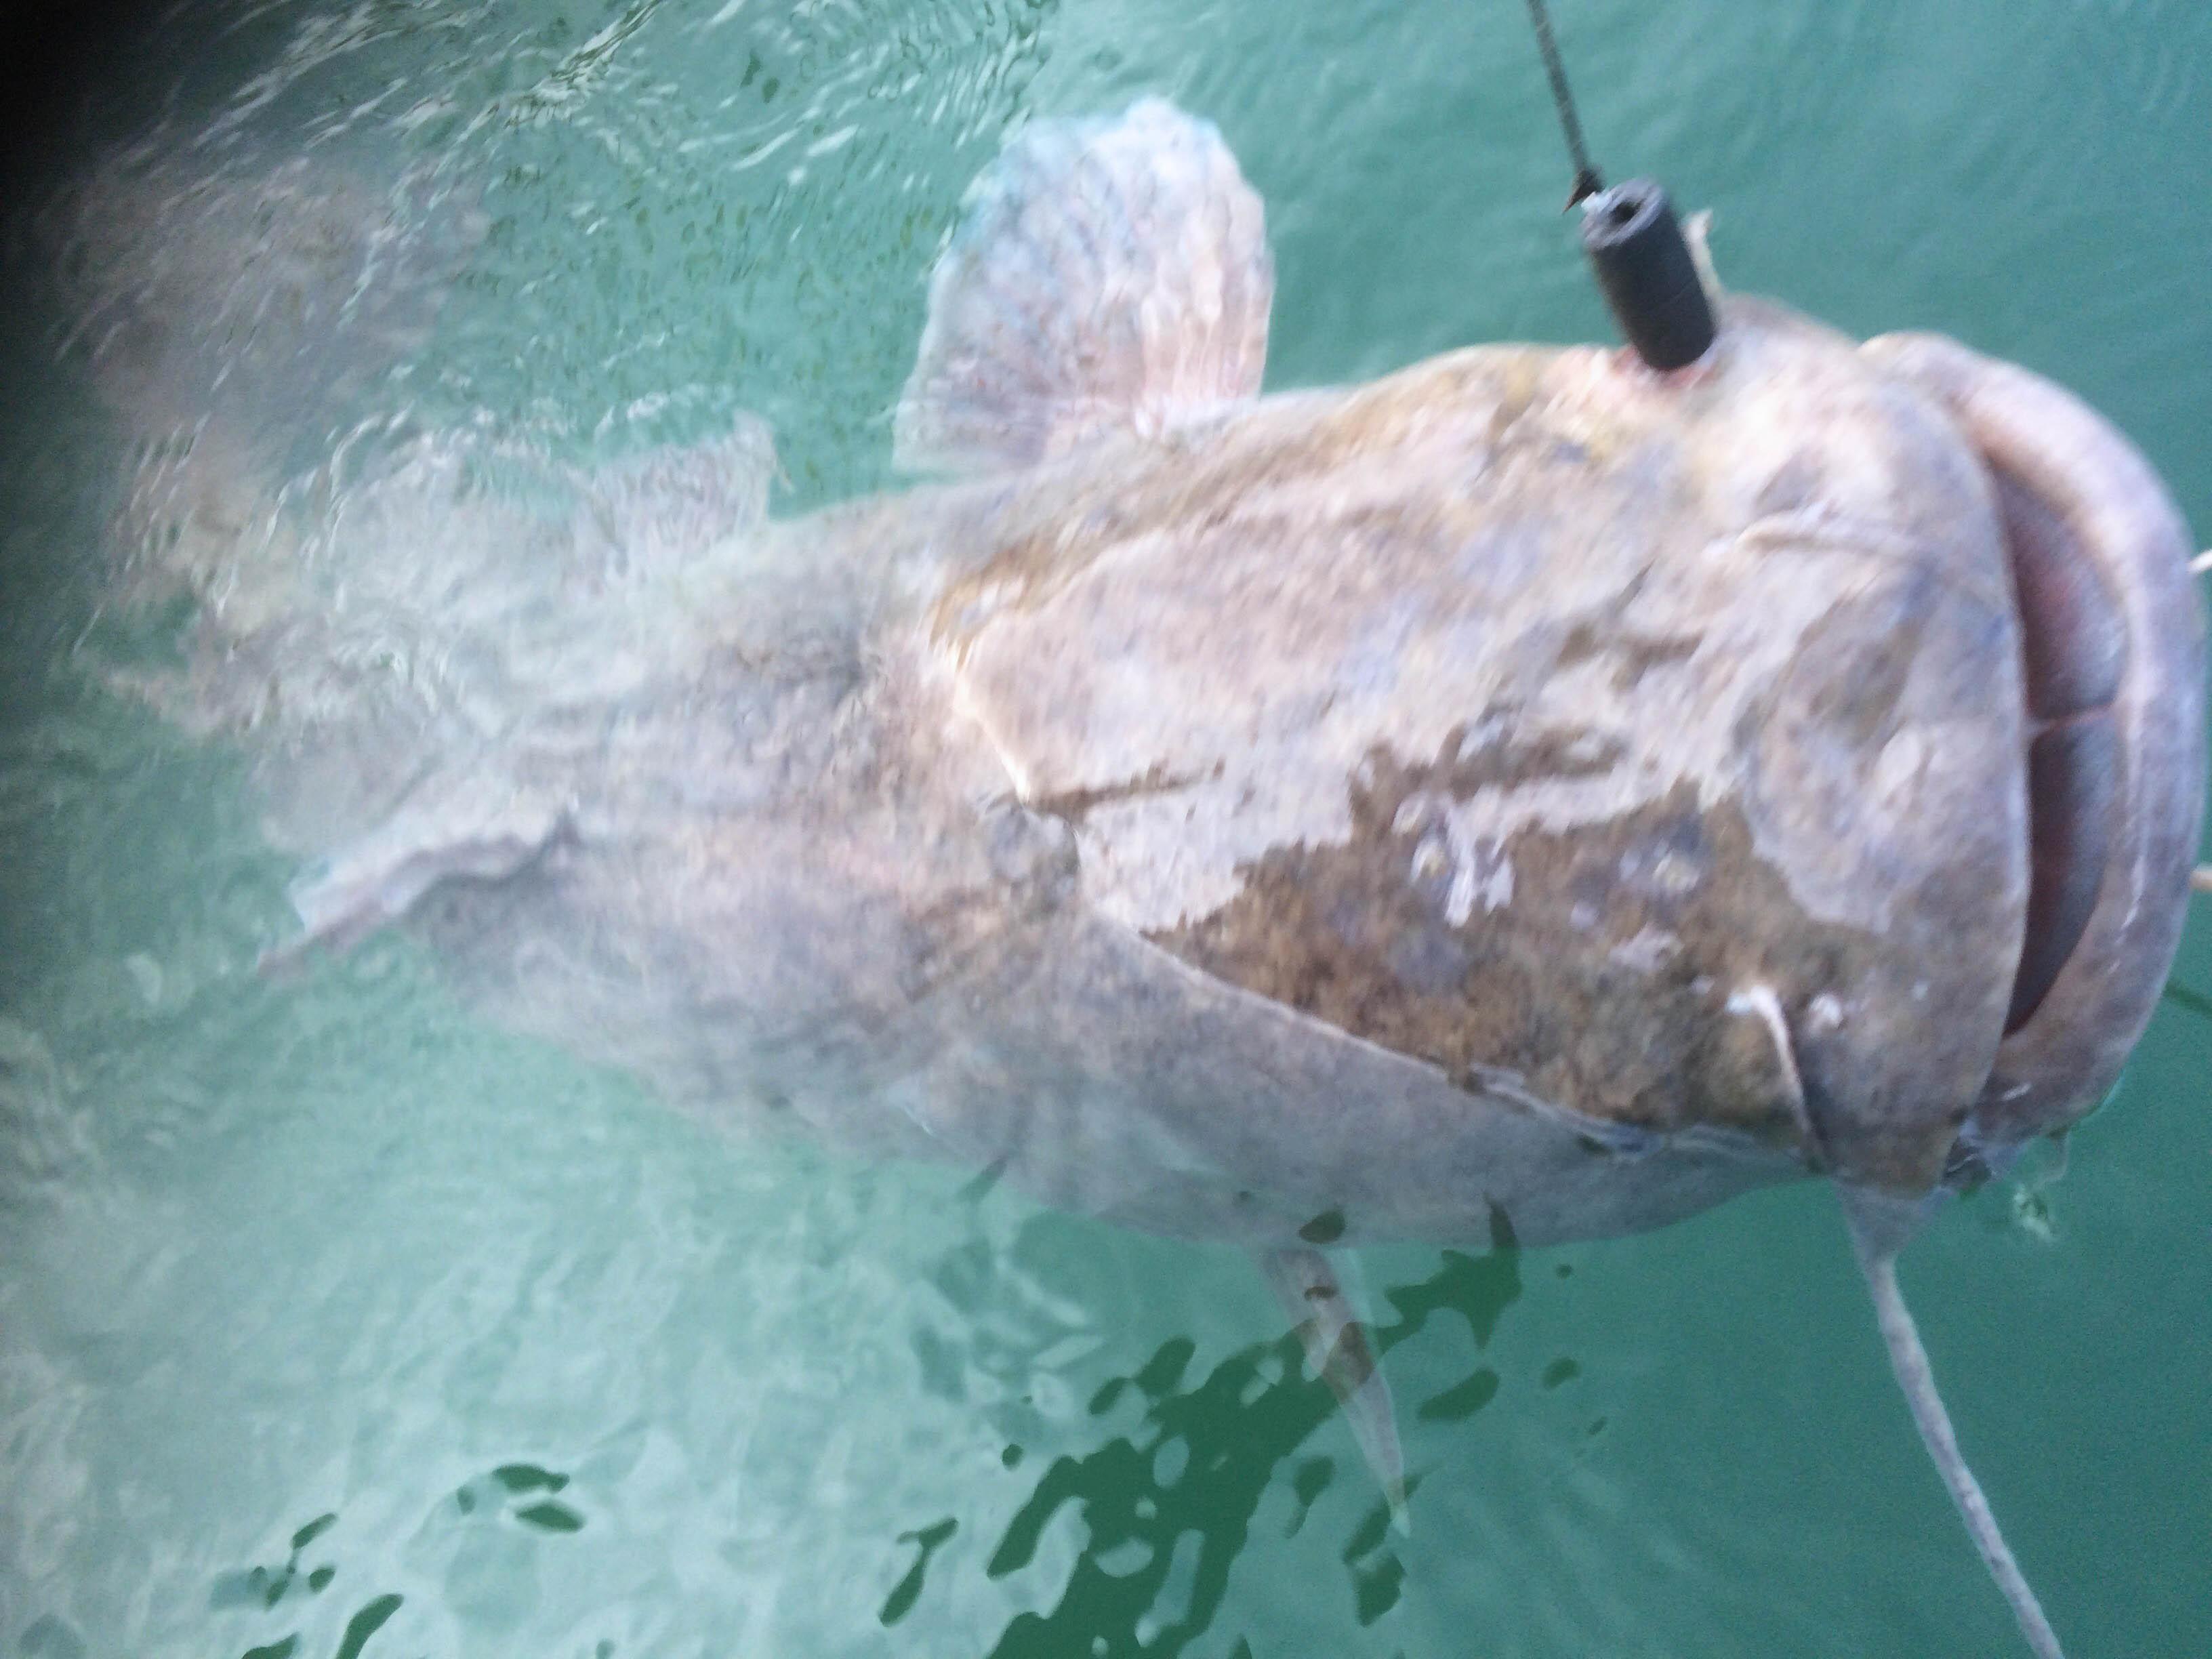 Finding a 38-pound catfish on the Guadalupe River San Marcos Record